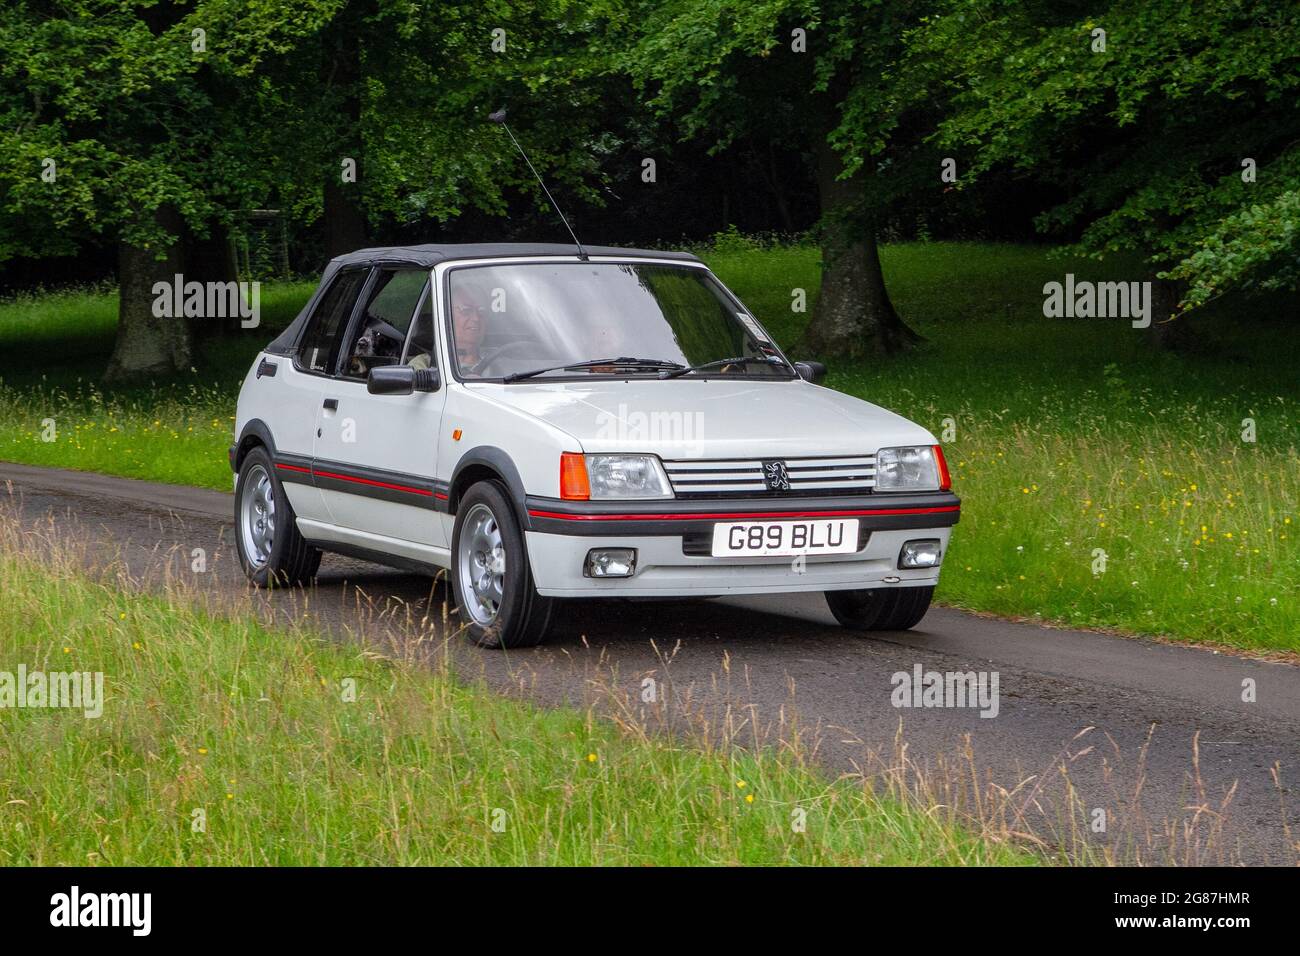 A 1990 90s white Peugeot 205 Cti Cabriolet Petrol at ‘The Cars the Star Show” in Holker Hall & Gardens, Grange-over-Sands, UK Stock Photo